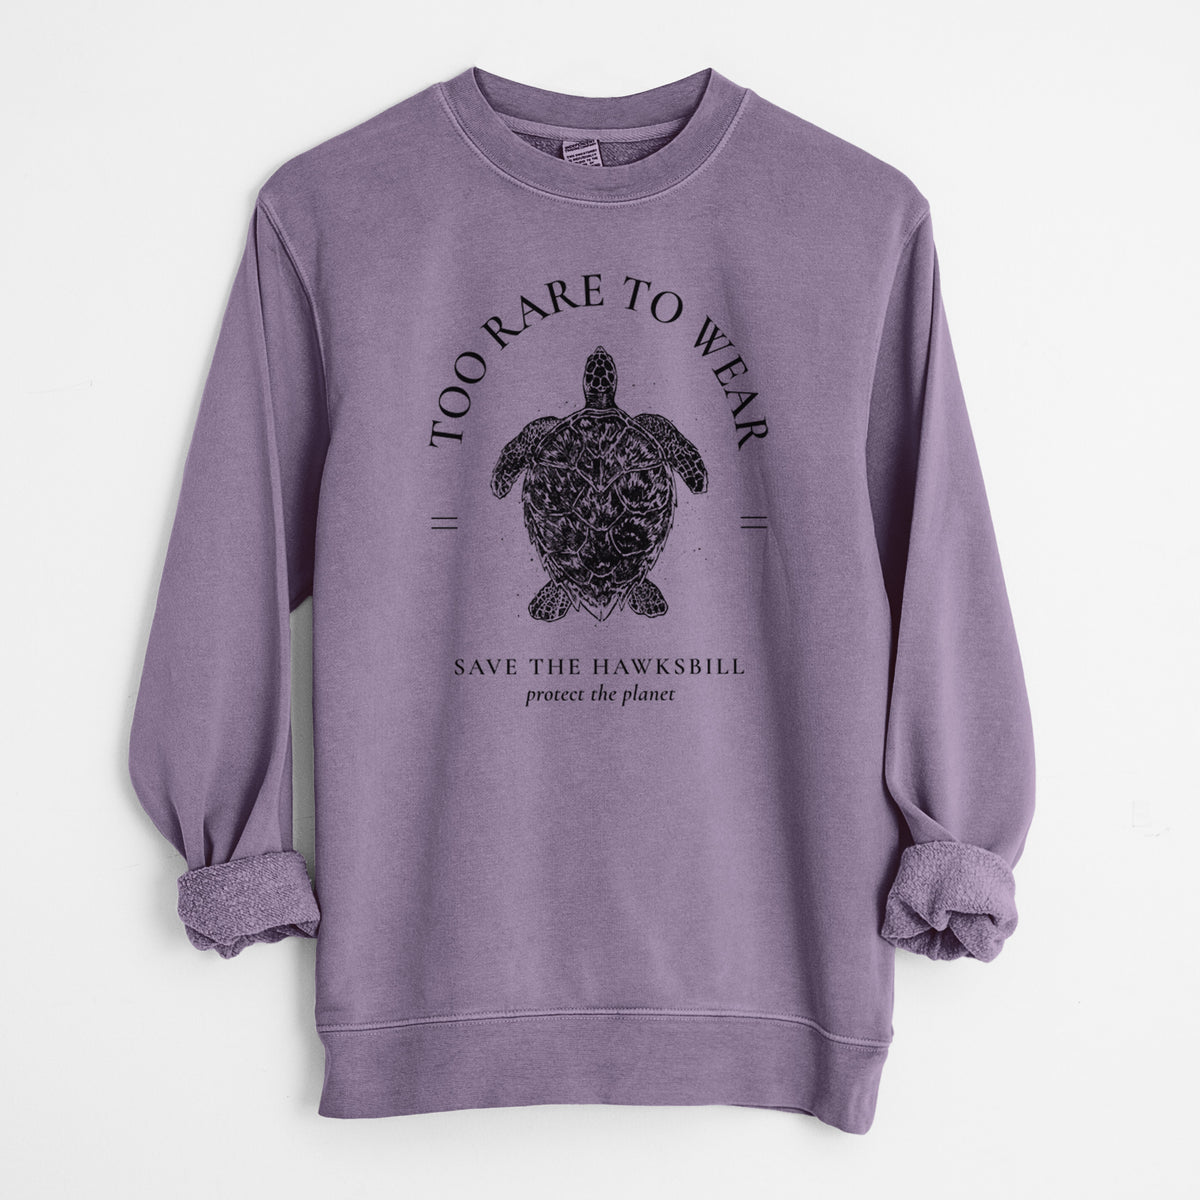 Too Rare to Wear - Save the Hawksbill - Unisex Pigment Dyed Crew Sweatshirt